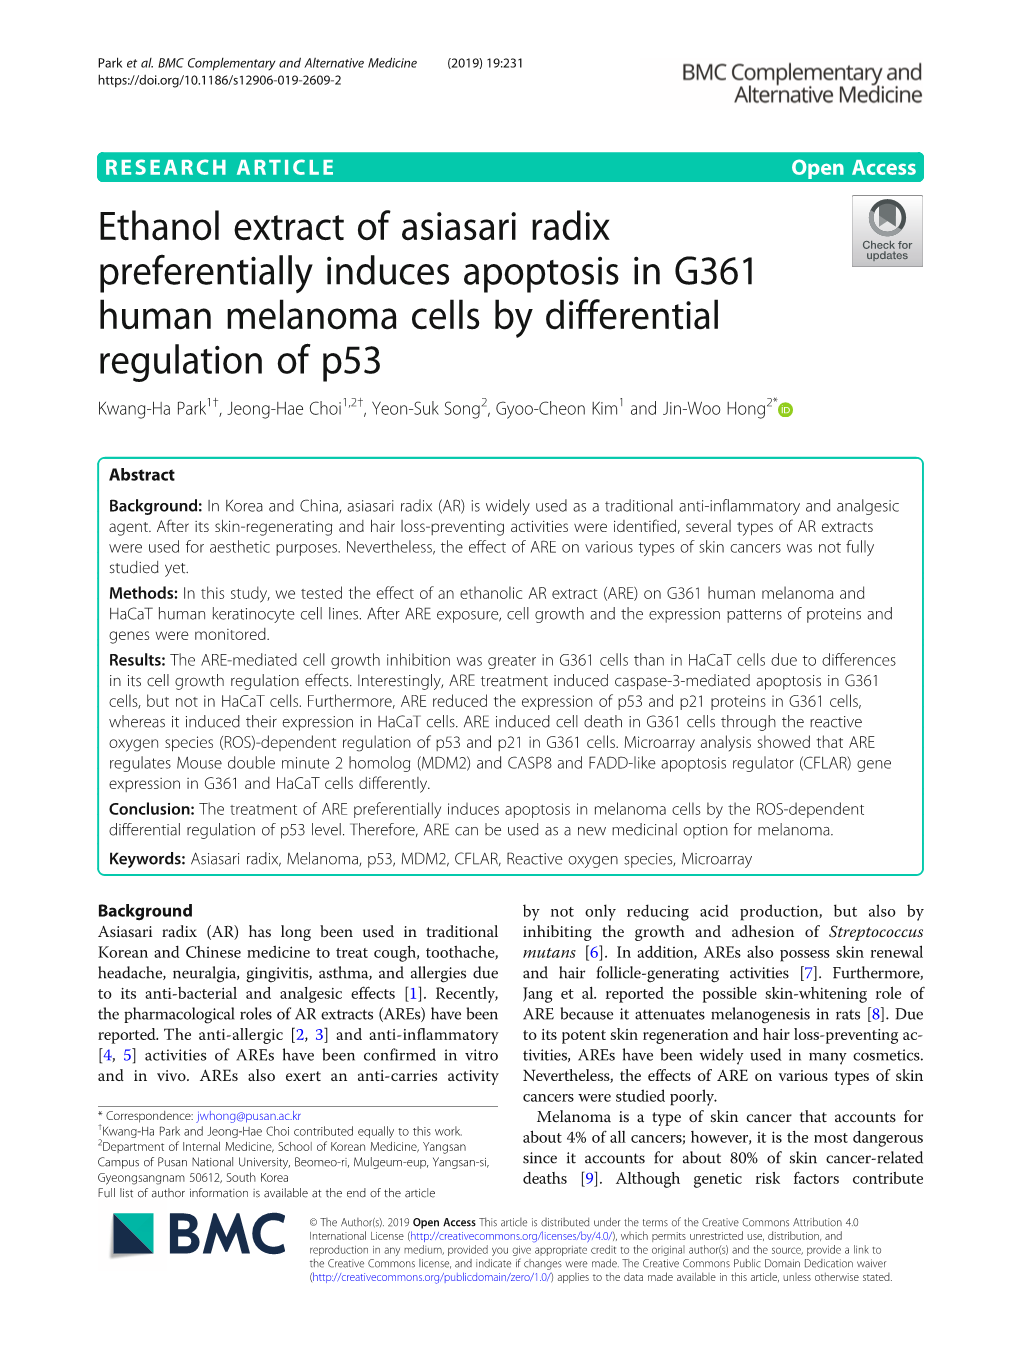 Ethanol Extract of Asiasari Radix Preferentially Induces Apoptosis In